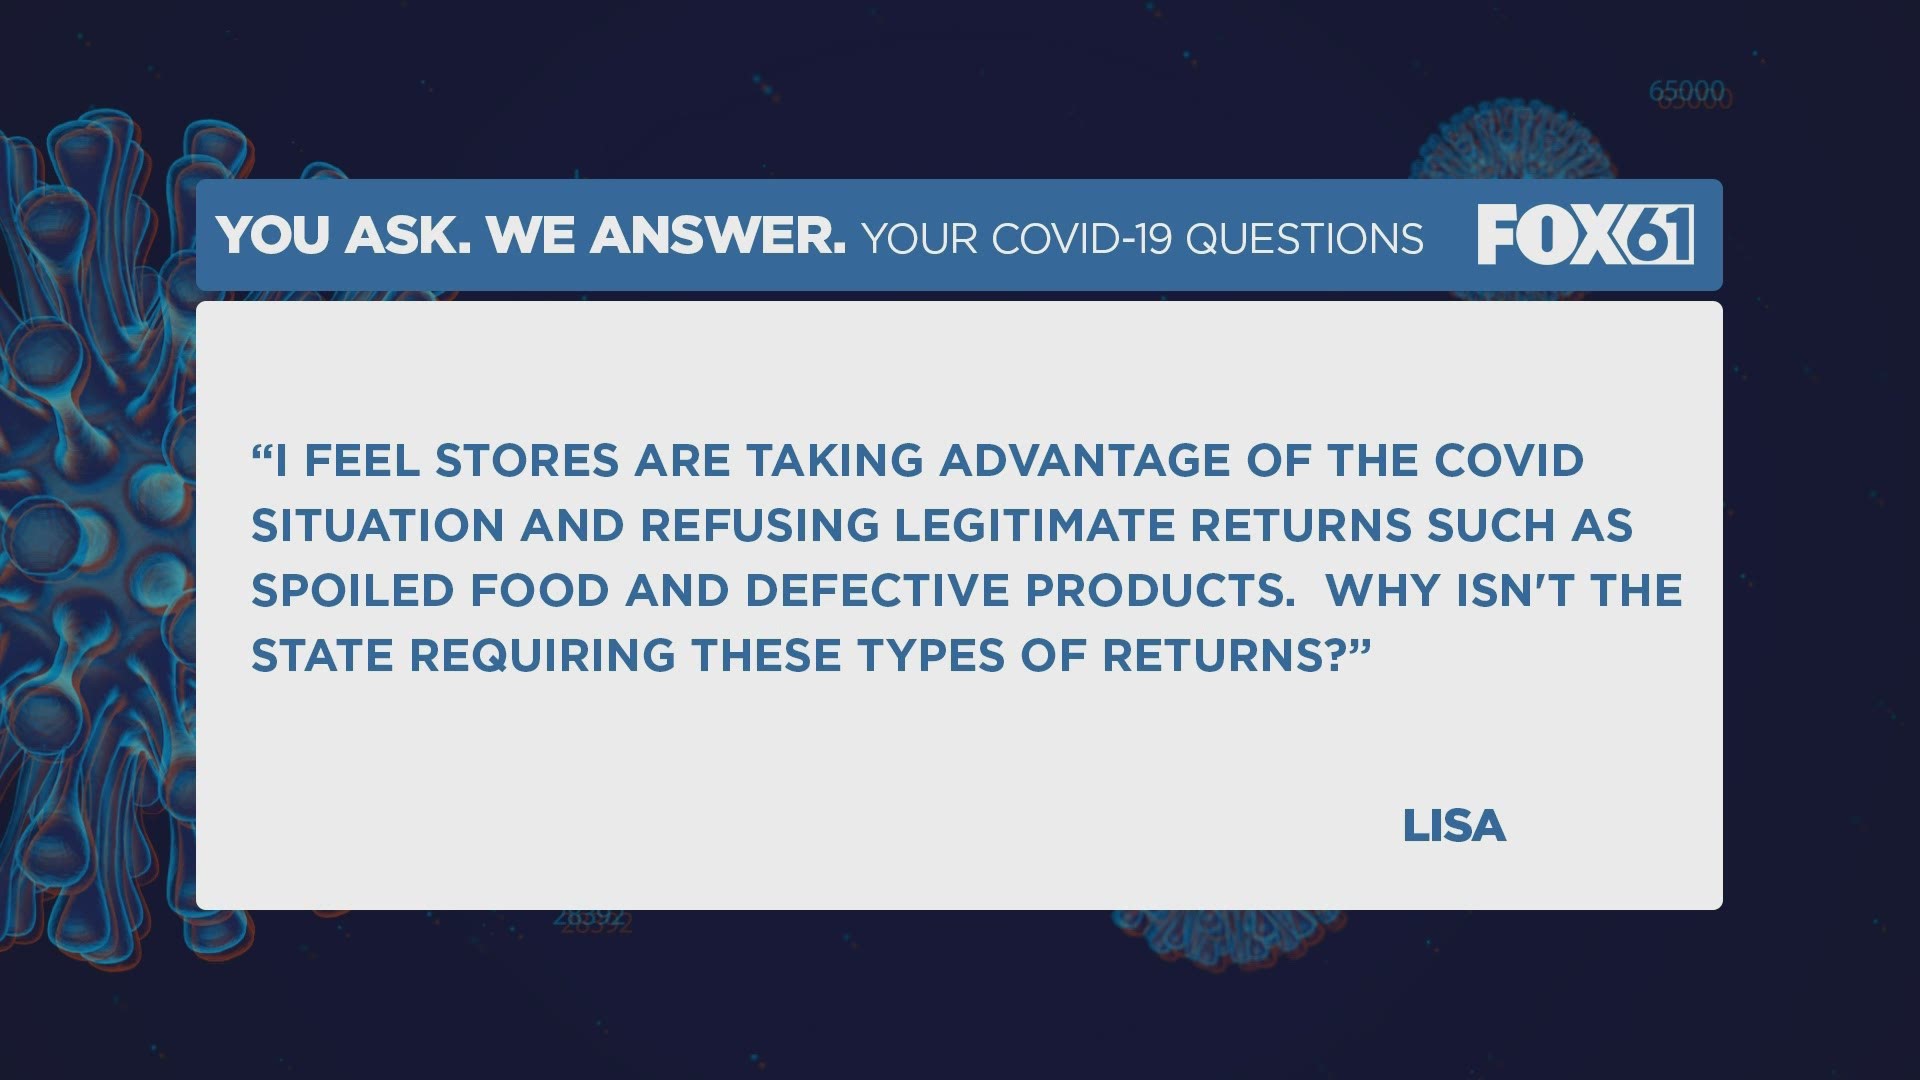 Lisa wrote, “I feel stores are taking advantage of the COVID situation and refusing legitimate returns such as spoiled food and defective products."